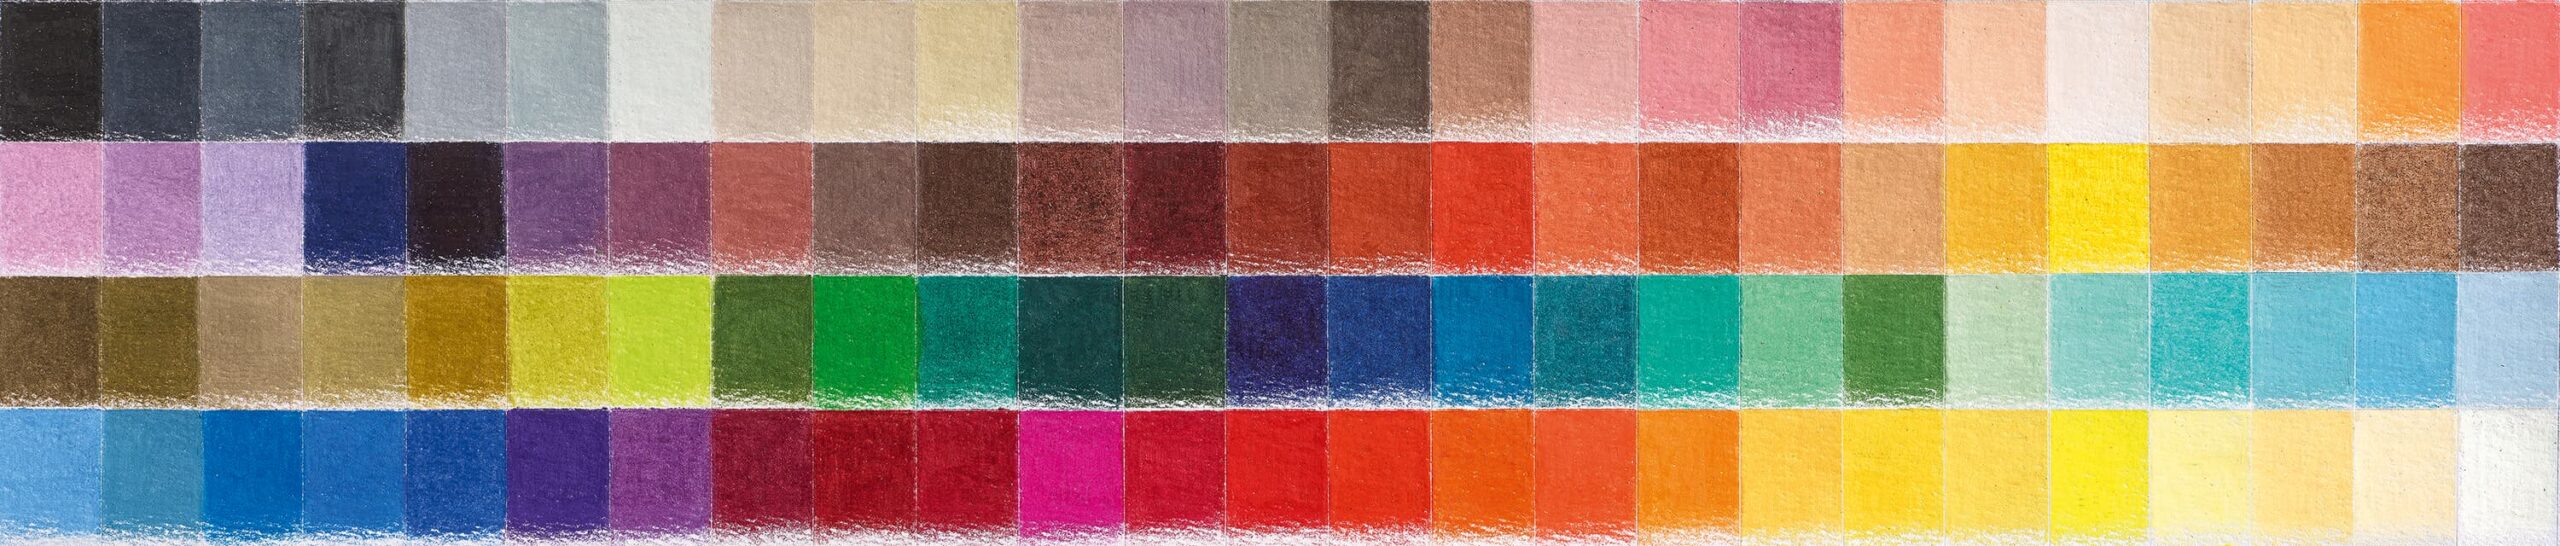 A palette of 100 LUMINANCE 6901™ colors